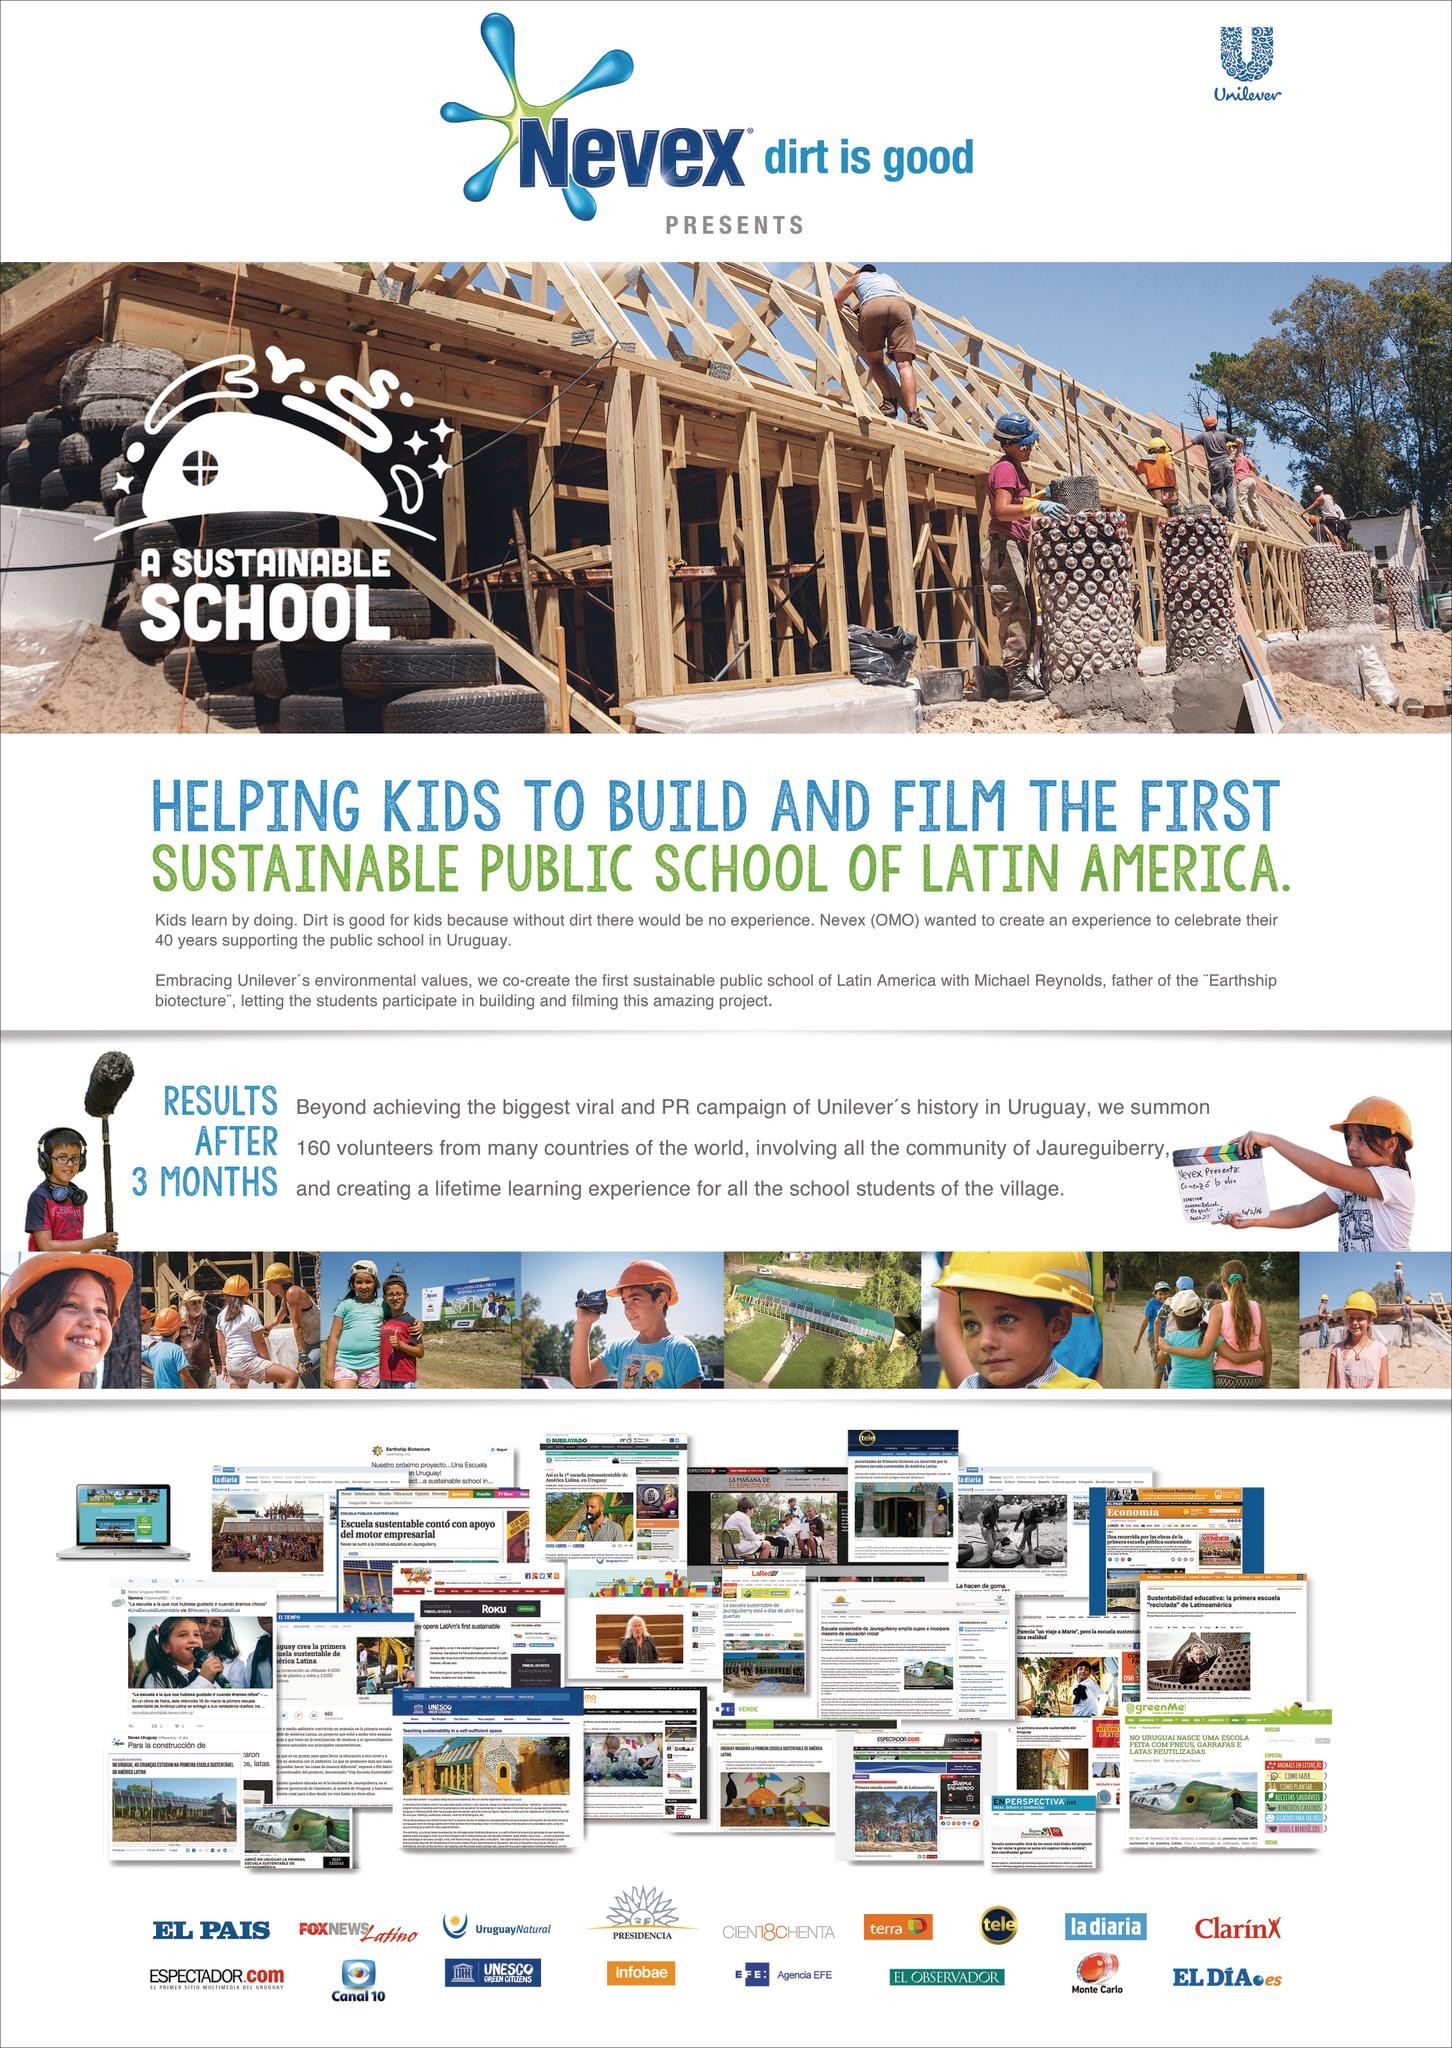 A sustainable school